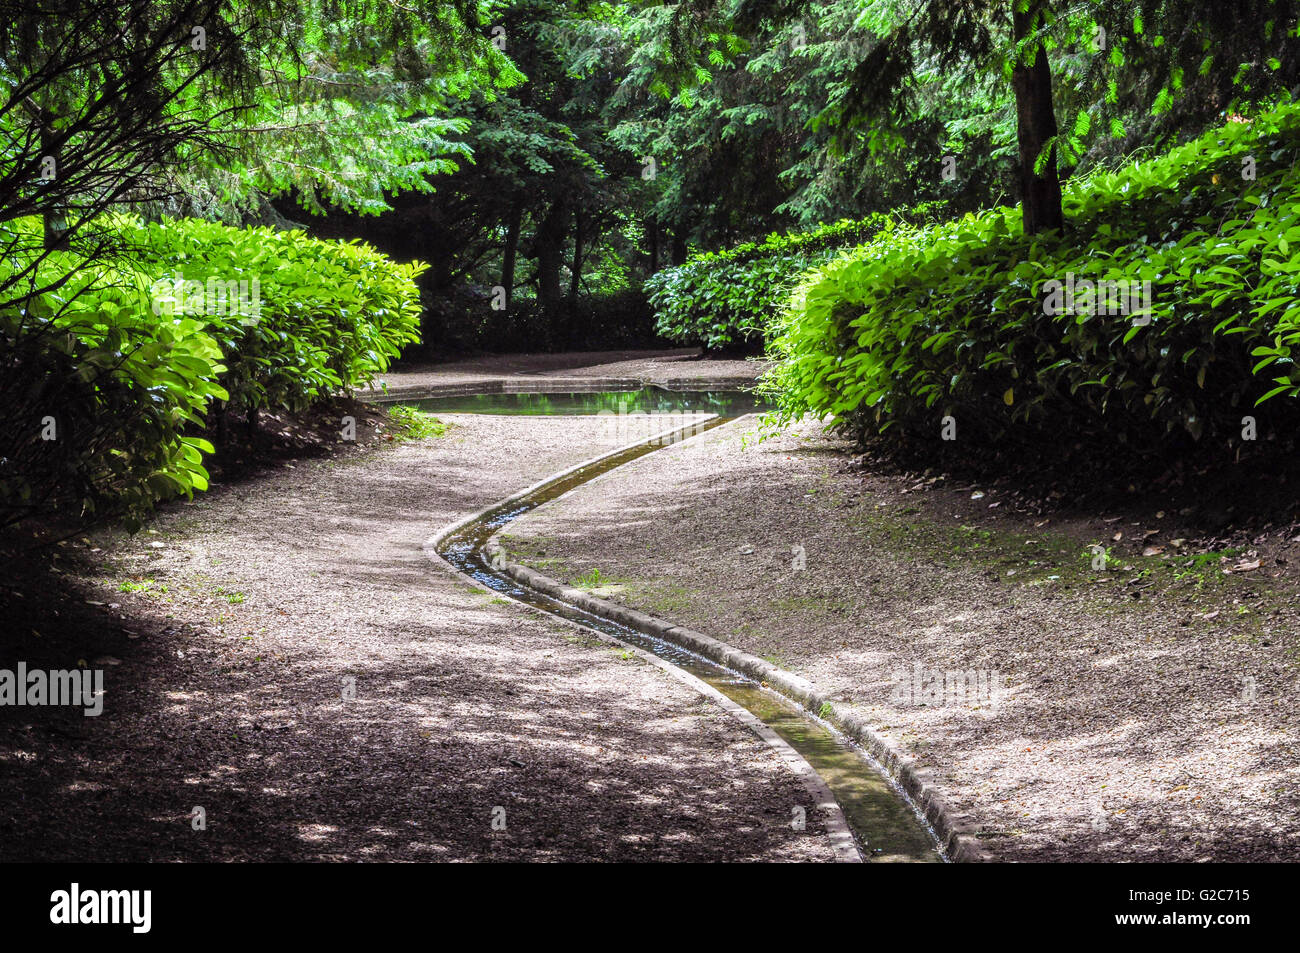 The famous rill and pond in the grounds of Rousham House, Oxfordshire, UK. Stock Photo